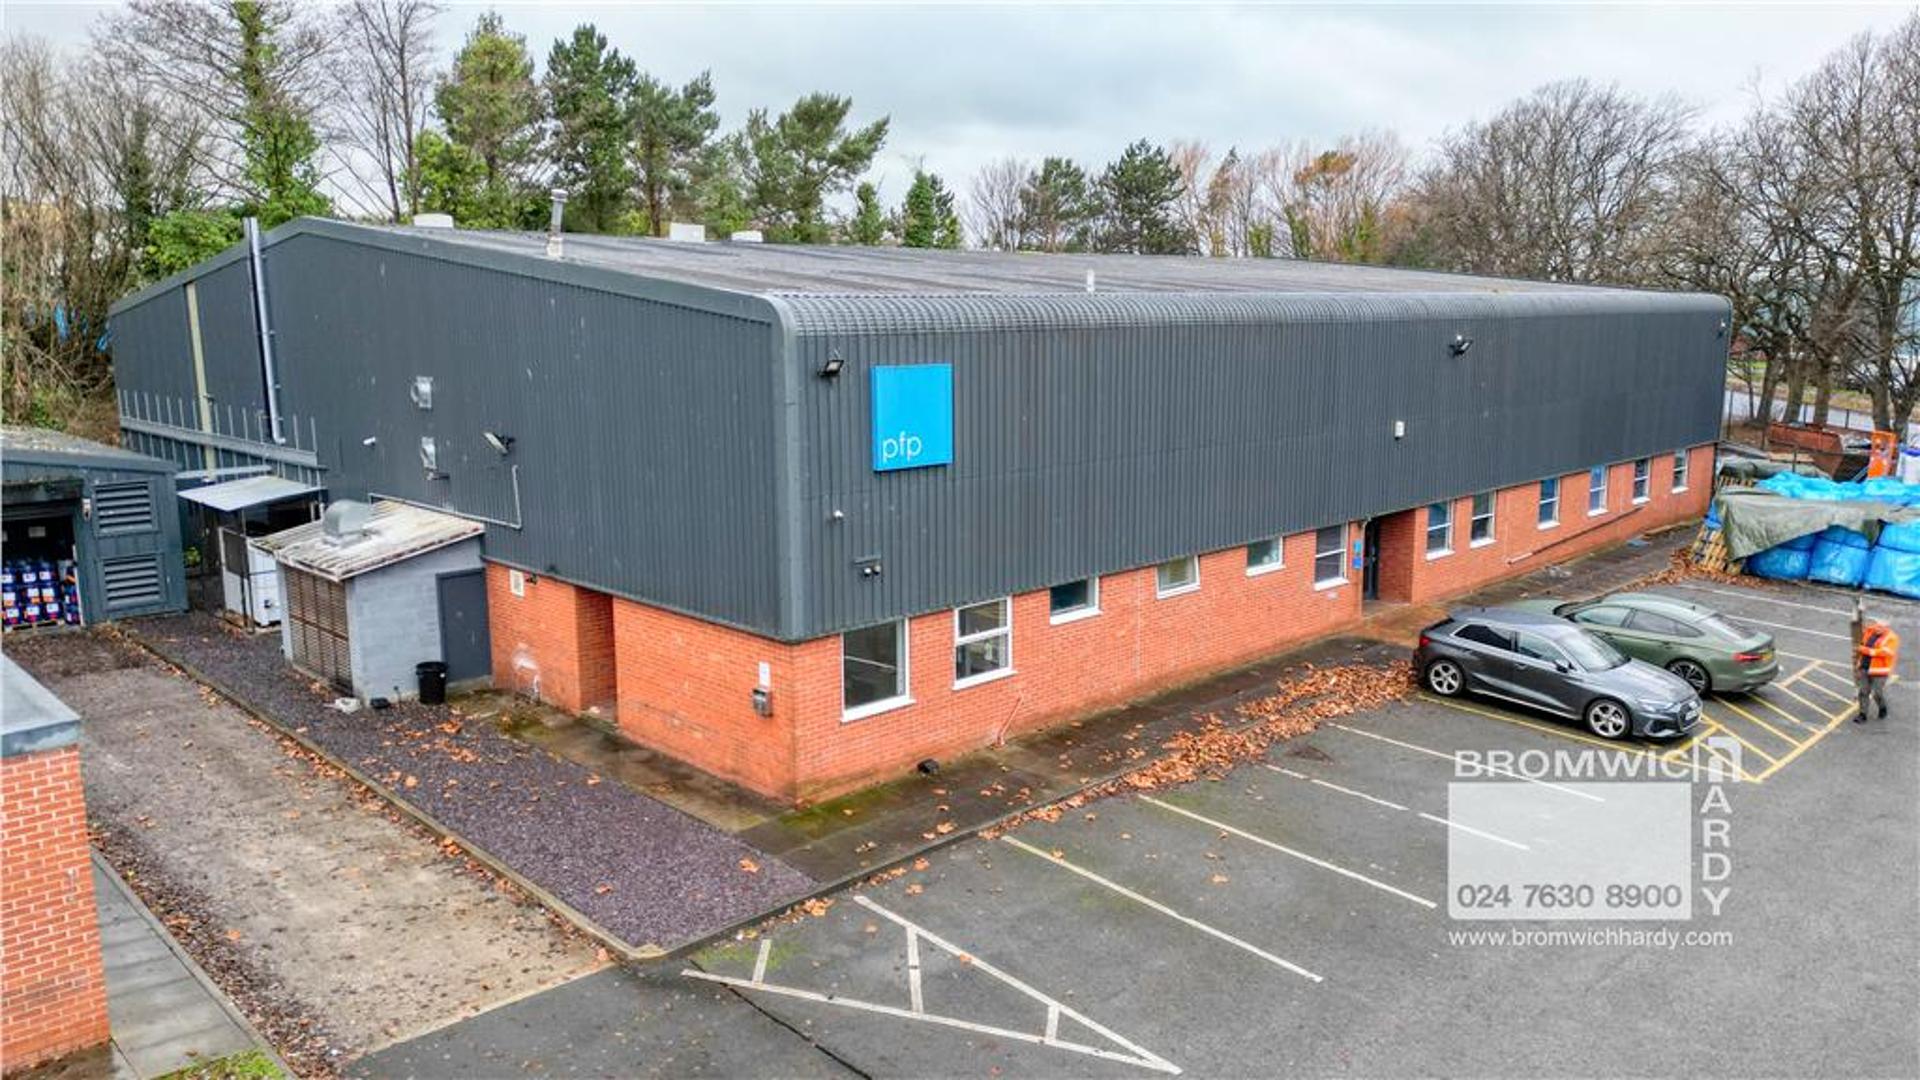 17,000 sq ft North Wales industrial unit on the market for £950k